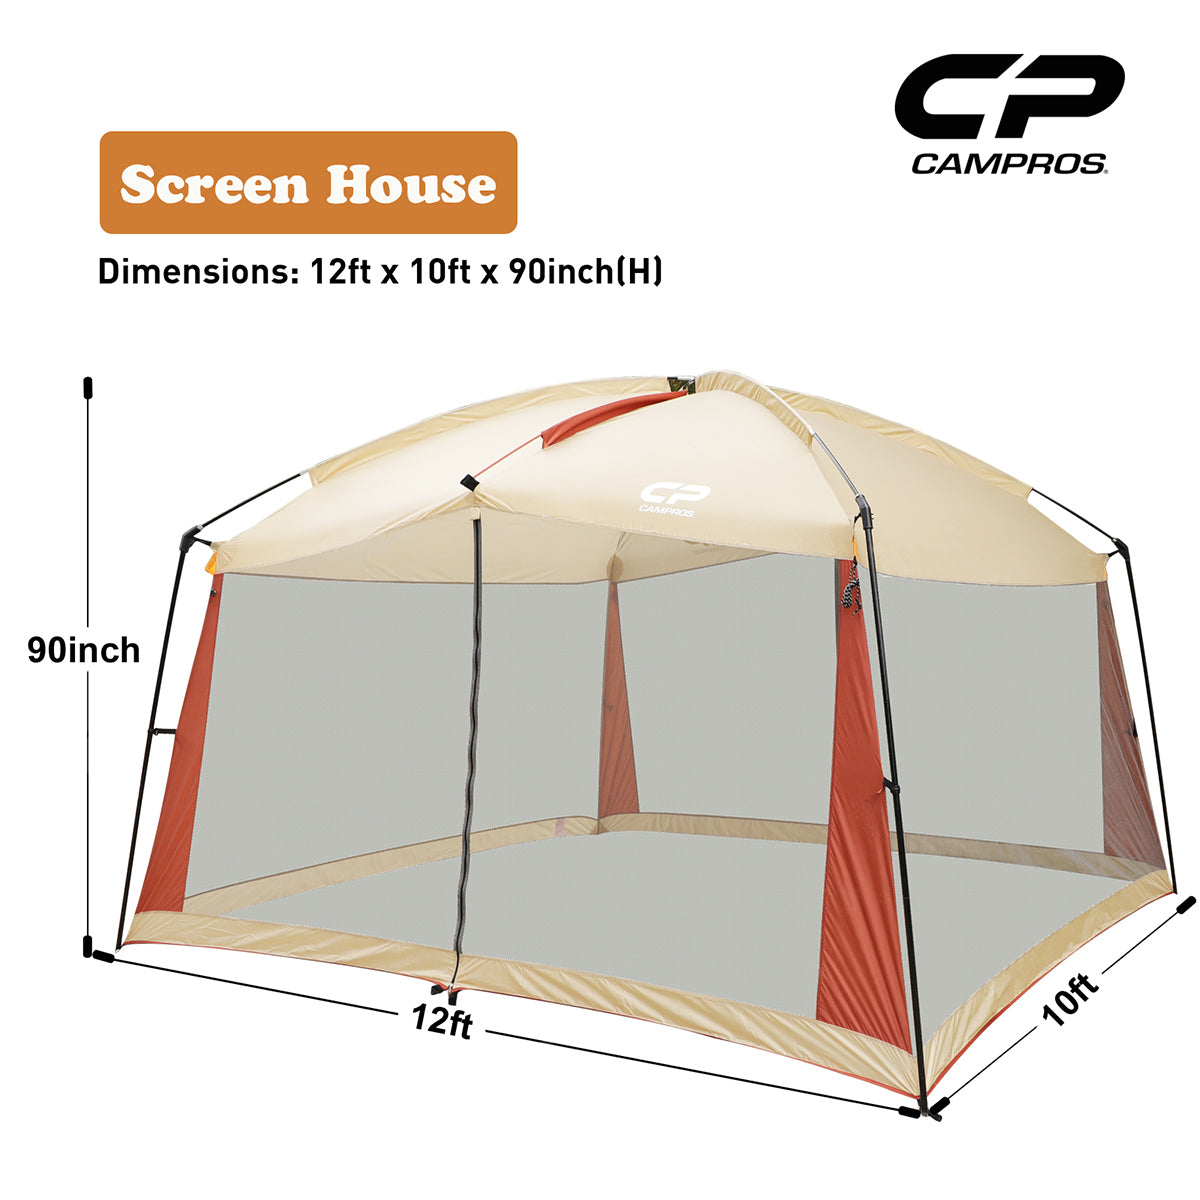 CAMPROS Screen House 12 x 10 Ft Canopy Tent-Canopy Tents-Campros Tent